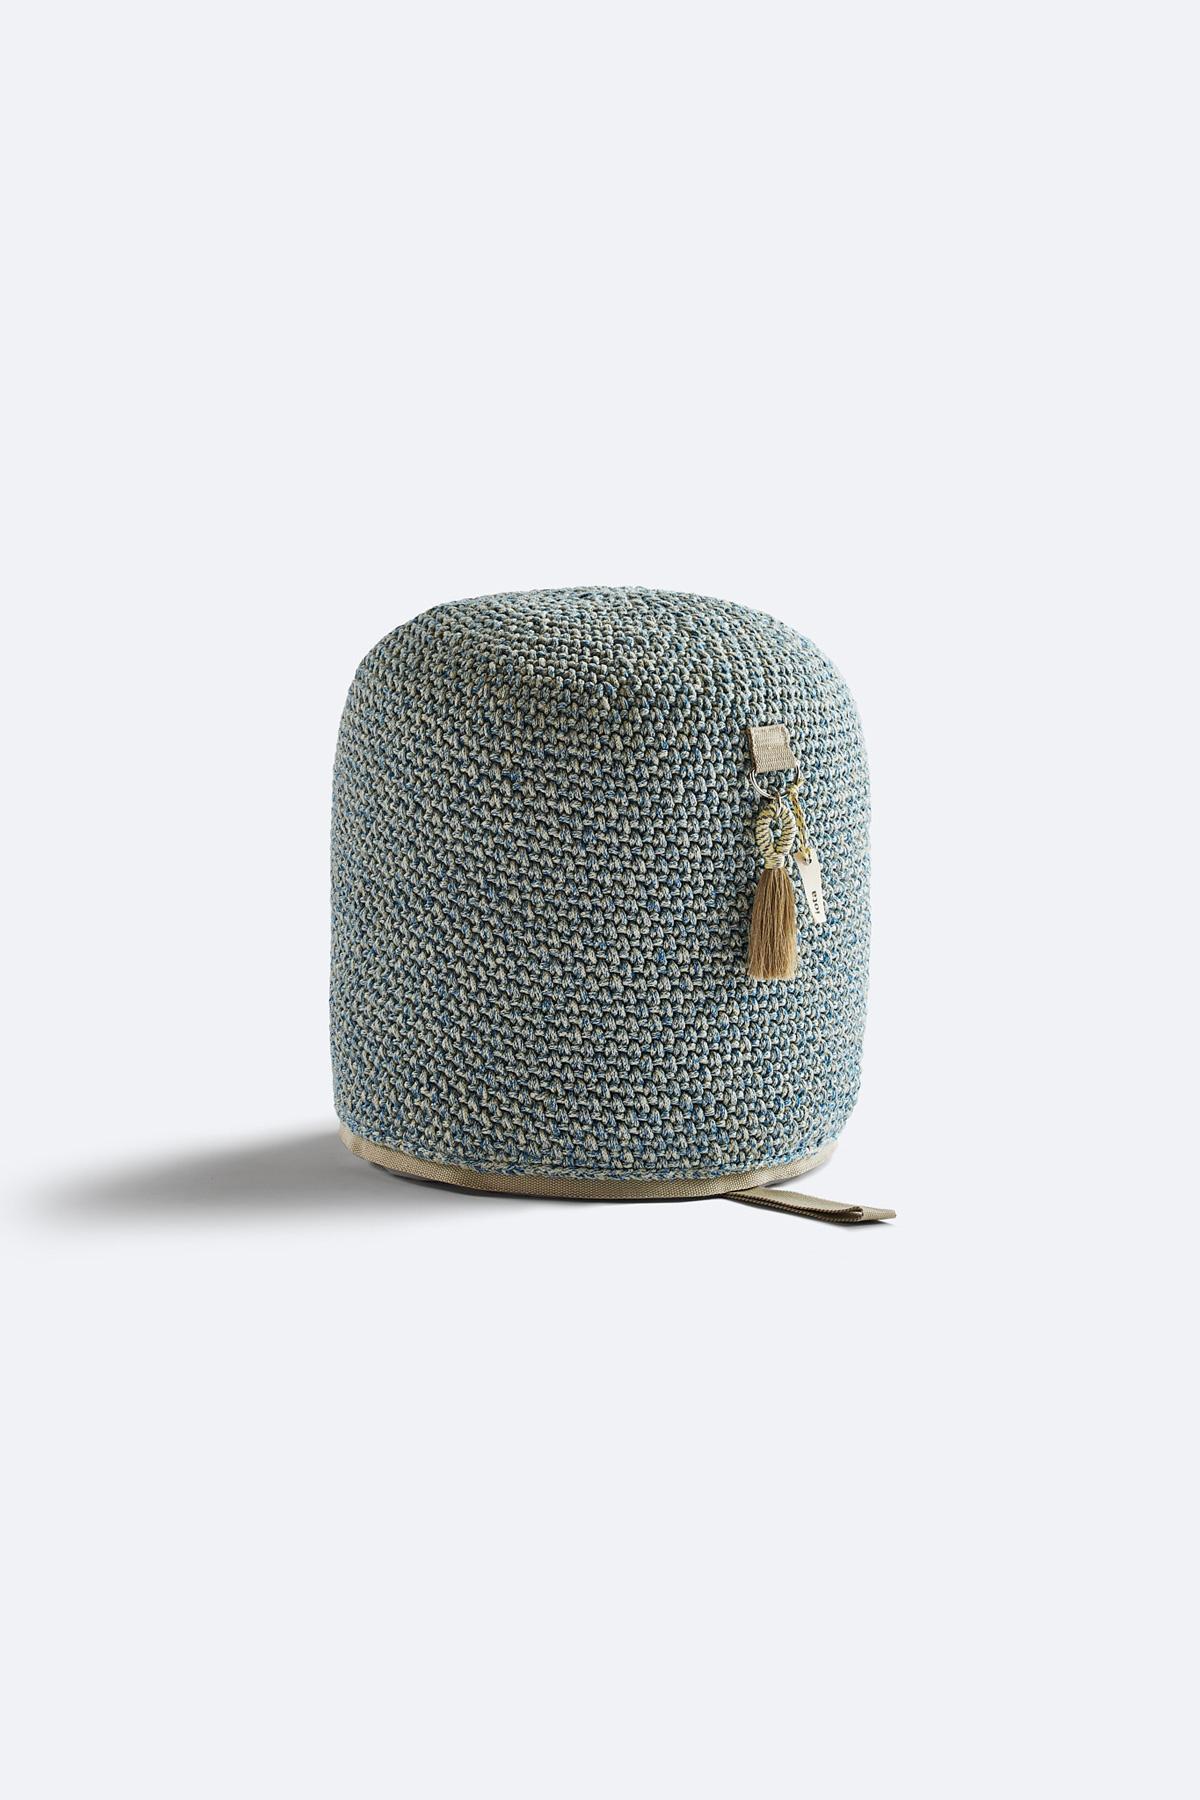 21st Century Asian Blue Sand Outdoor-Indoor Handmade Single Seat Pouf In New Condition For Sale In Tel Aviv, IL